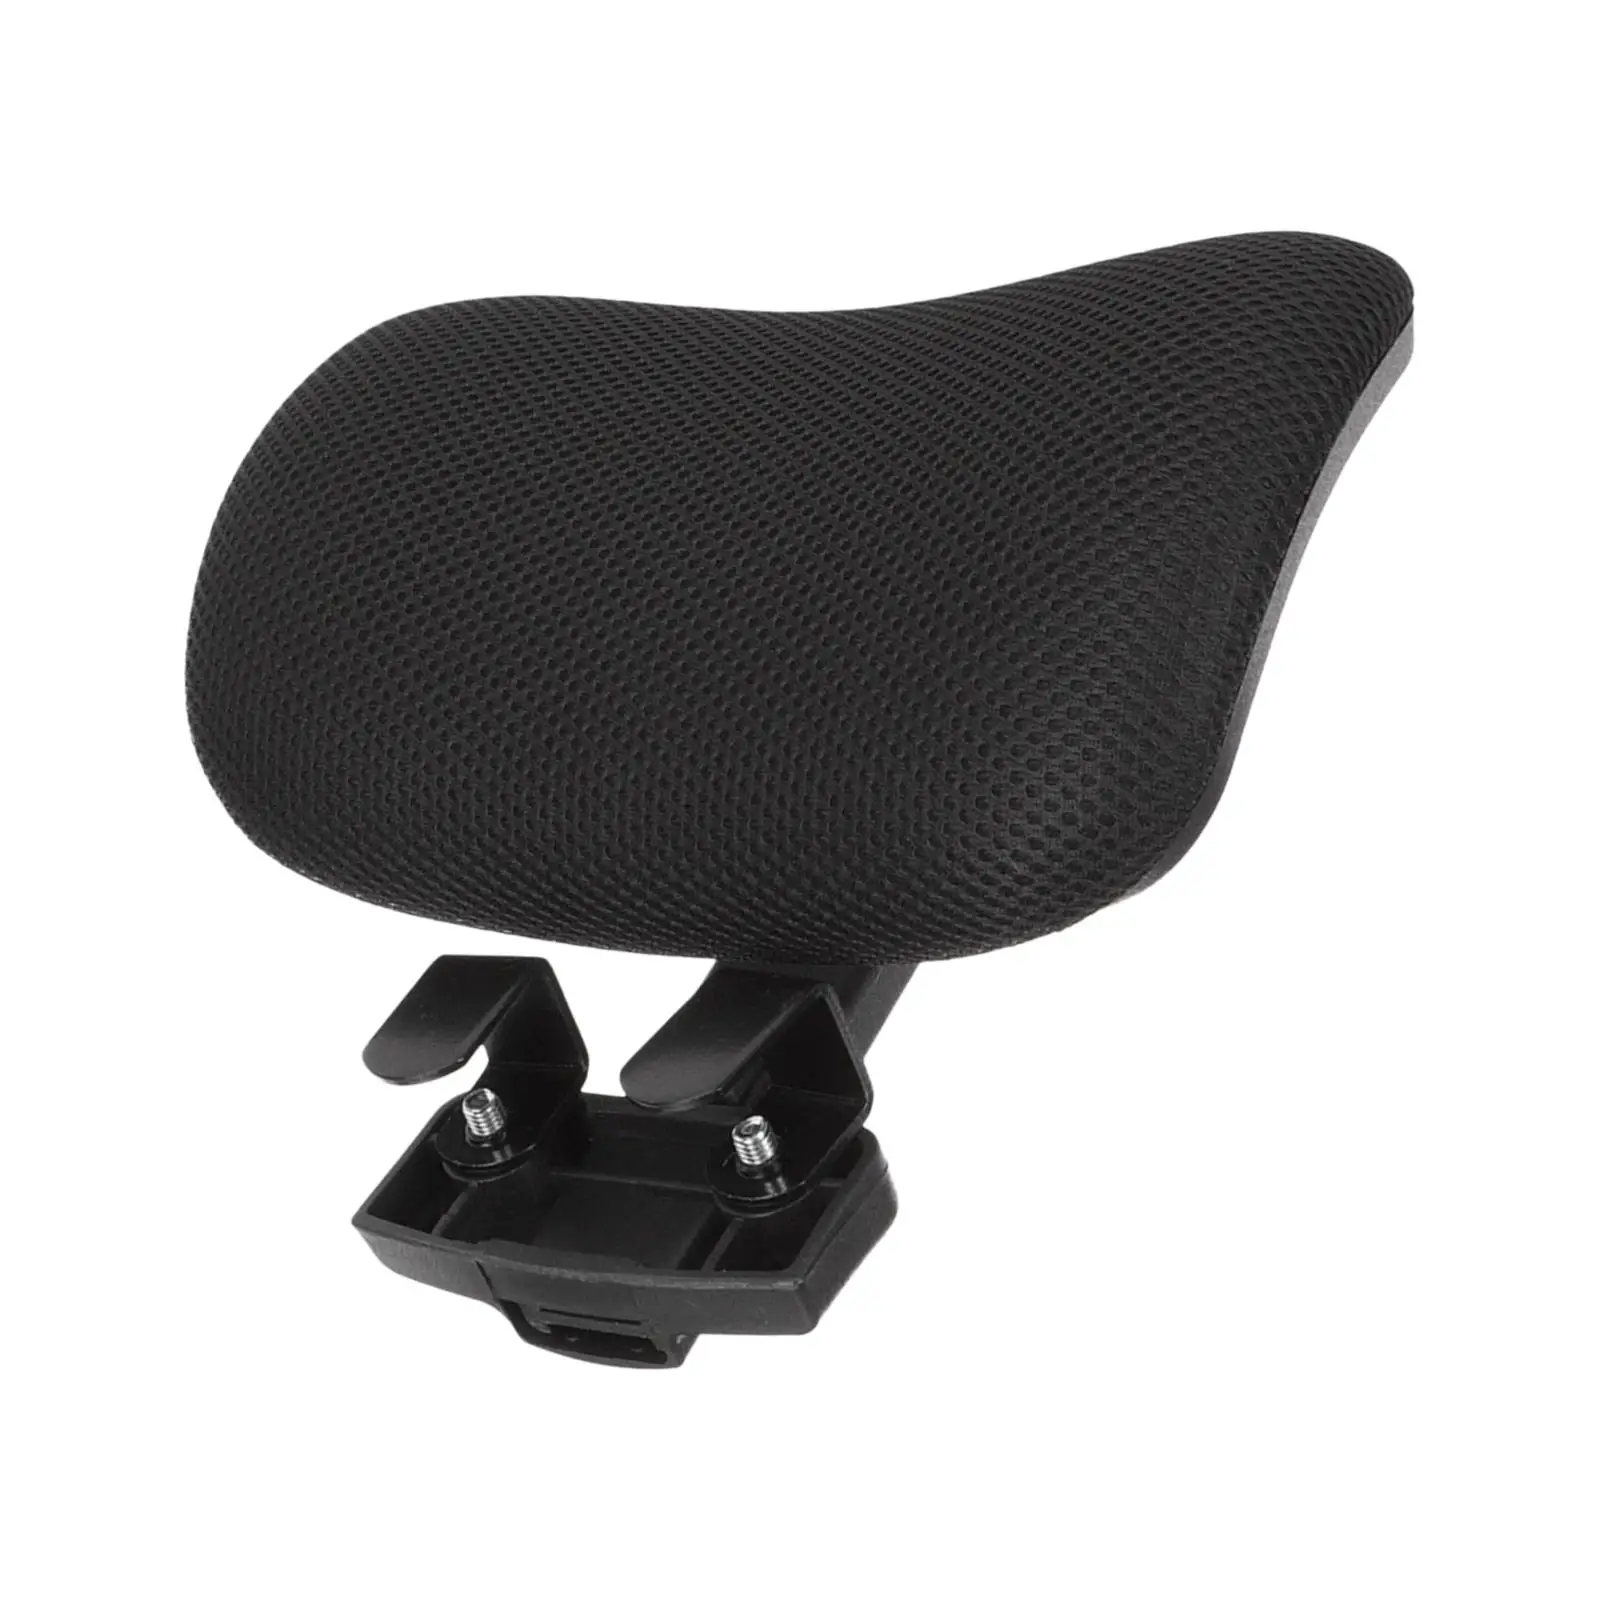 Computer Chair Headrest Attachment Easy to Install Comfortable Neck Support Cushion for Lifting Chair Desk Chair Furniture Home